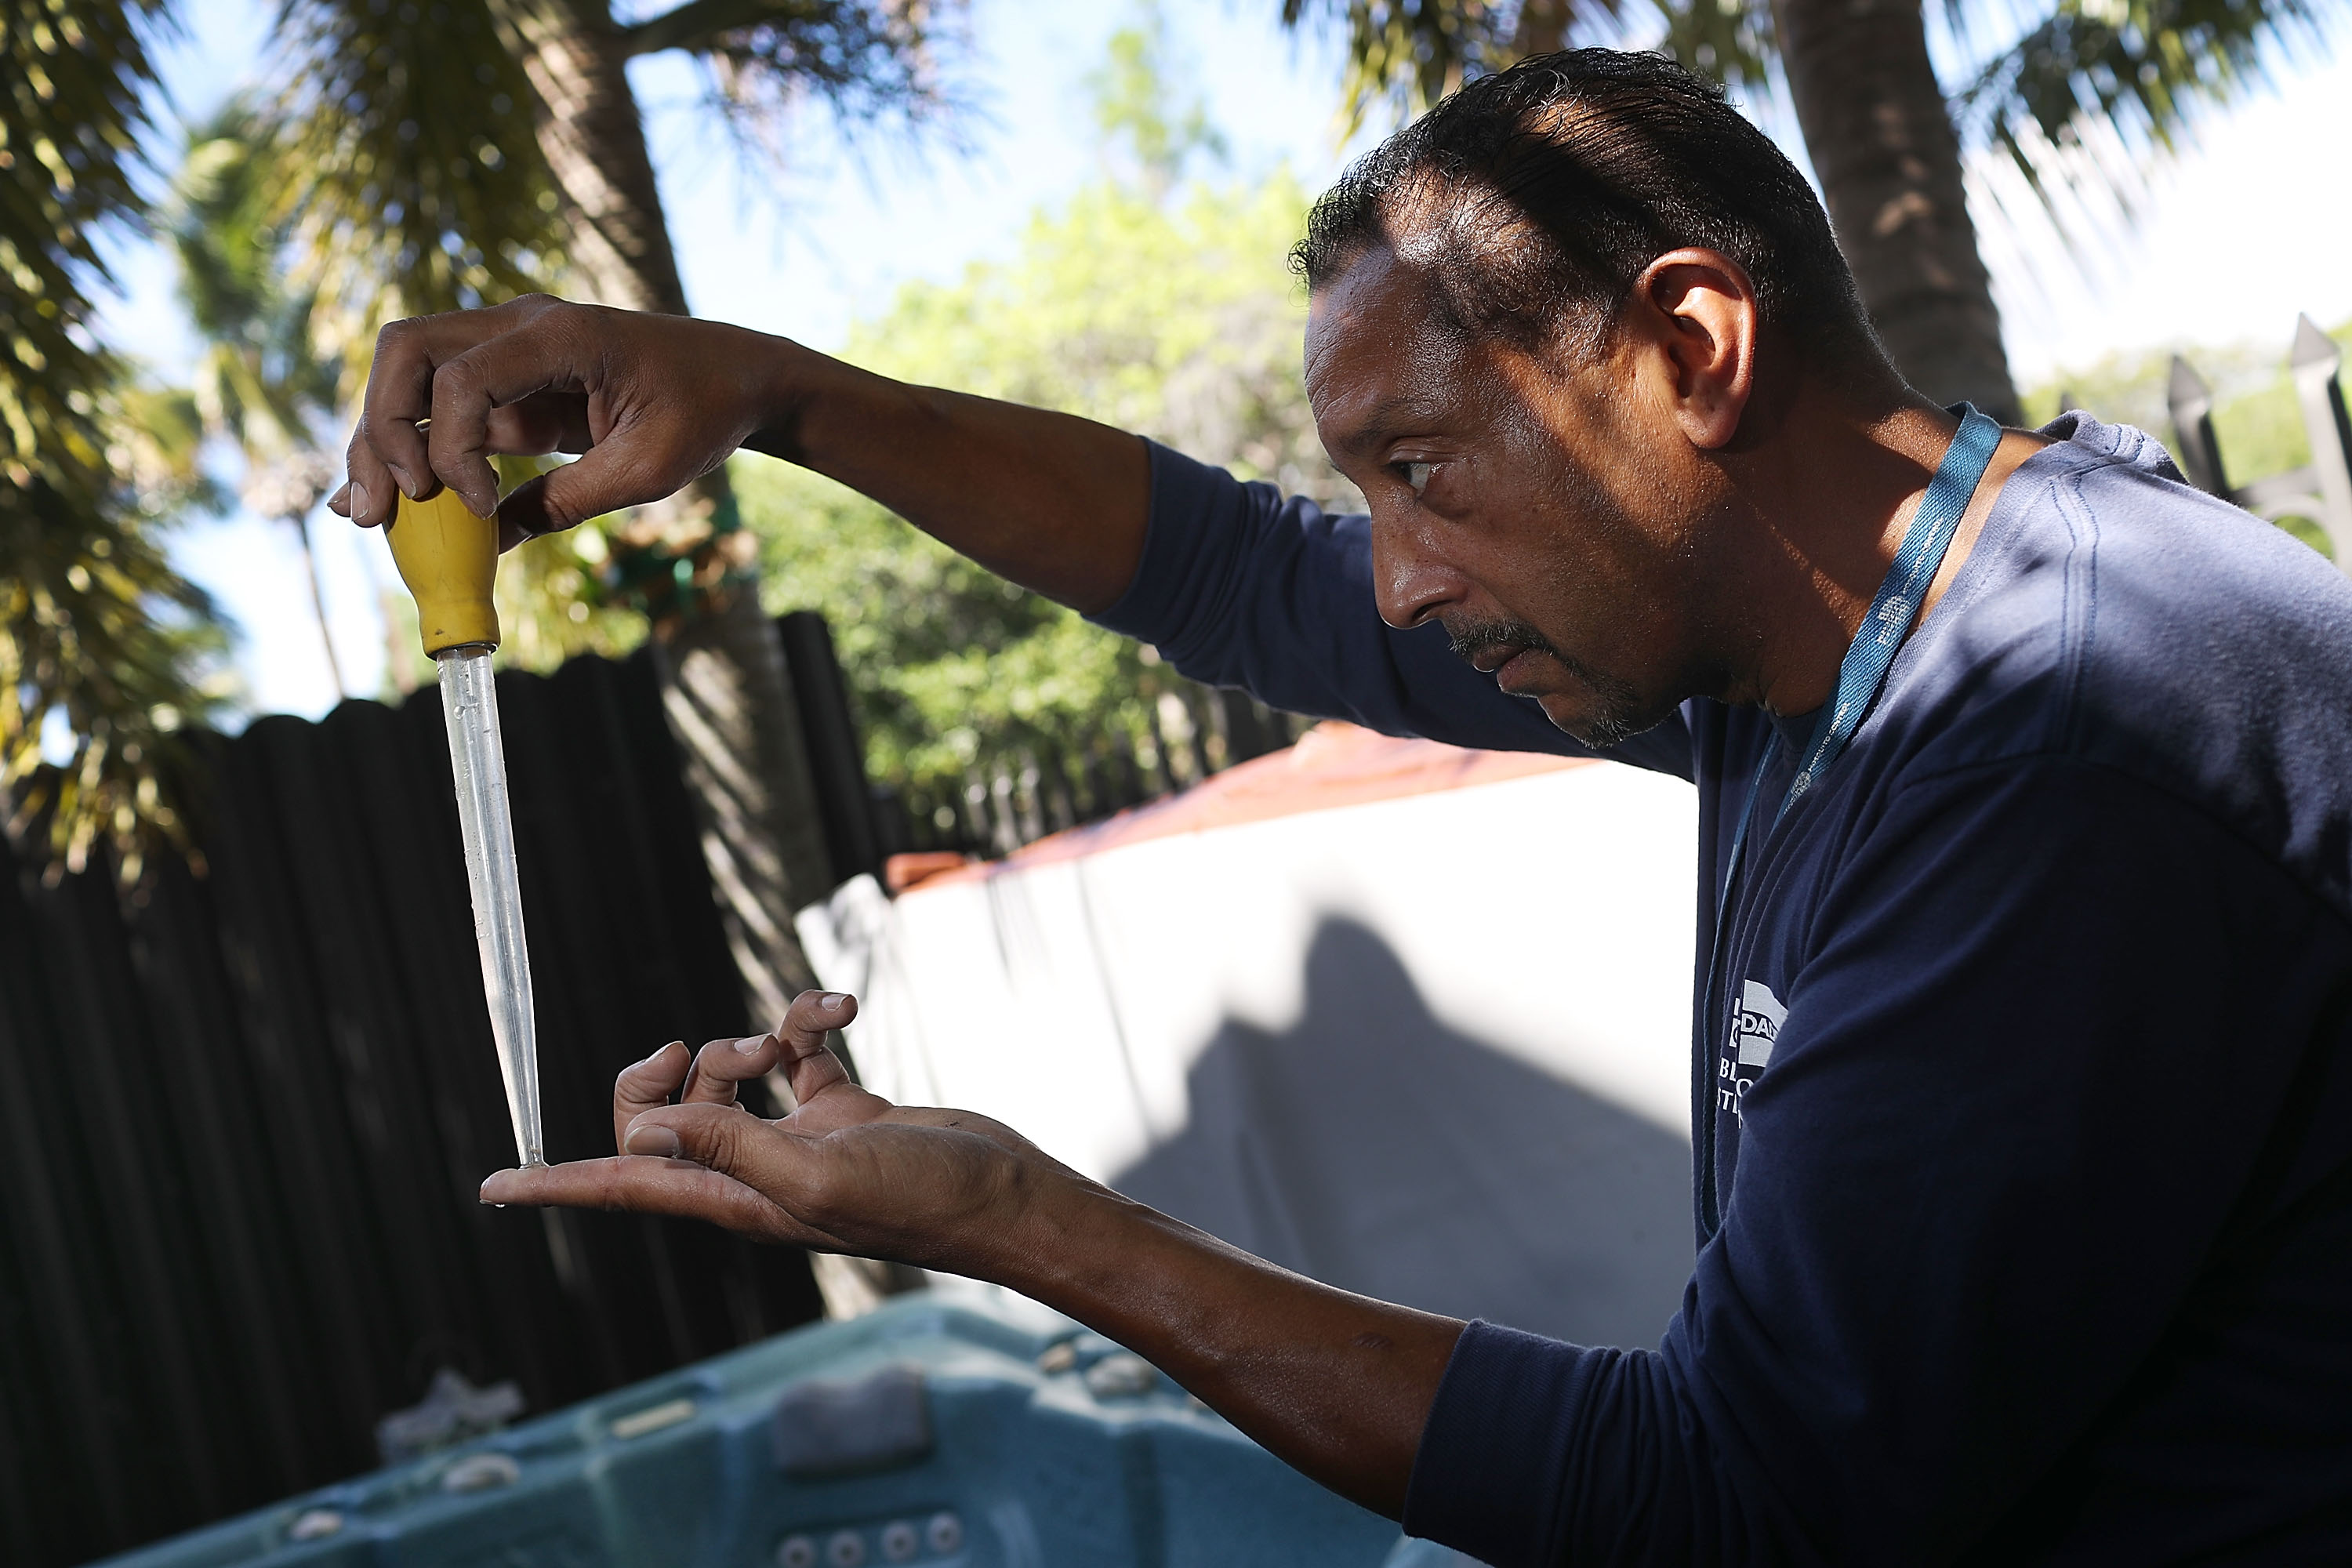 Larry Smart, a Miami-Dade County mosquito control inspector, looks at a mosquito larva in a sample of water taken from standing water before using a pesticide to eradicate the larva as the county continues to be proactive in fighting a possible Zika virus outbreak on May 26, 2016. (Joe Raedle—Getty Images)